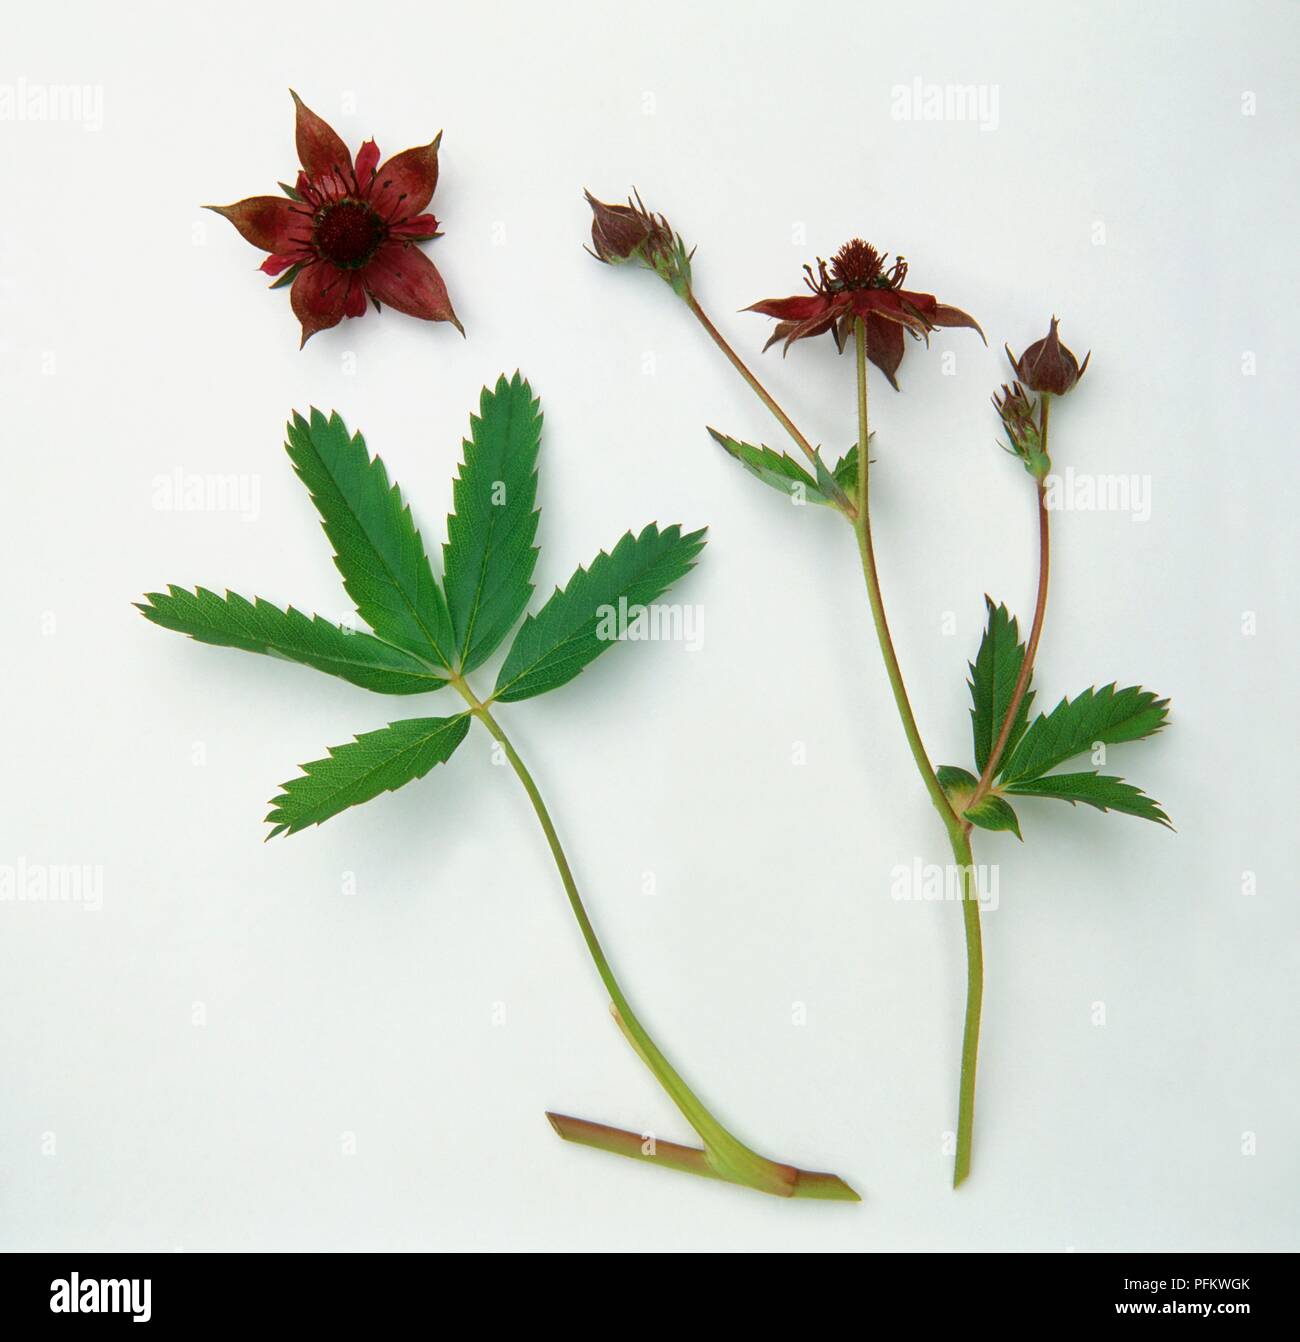 Potentilla palustris (Marsh cinquefoil), stems with flowers and leaves Stock Photo